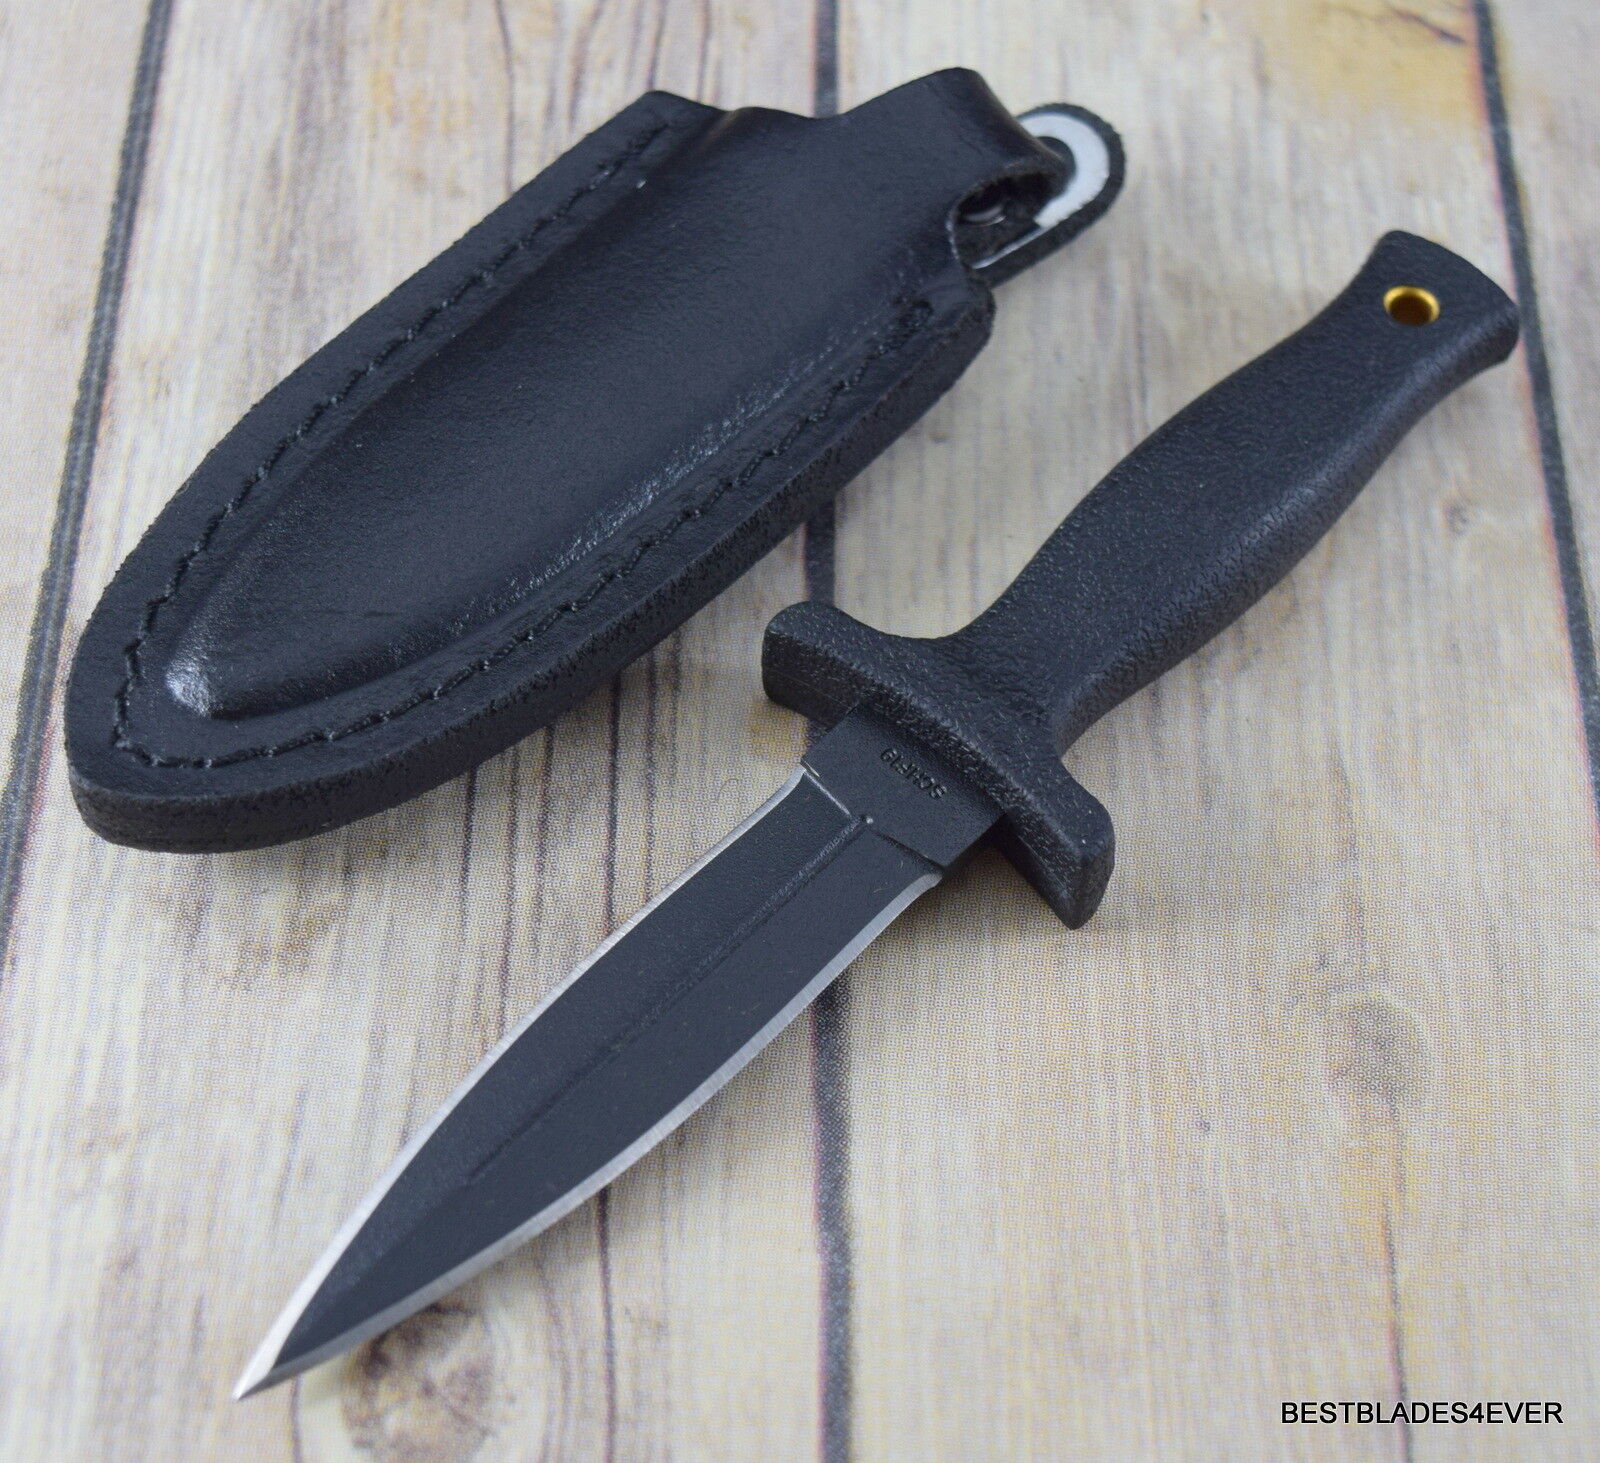 6.75 INCH SCHRADE SMALL FIXED BLADE BOOT KNIFE DOUBLE EDGE WITH LEATHER SHEATH